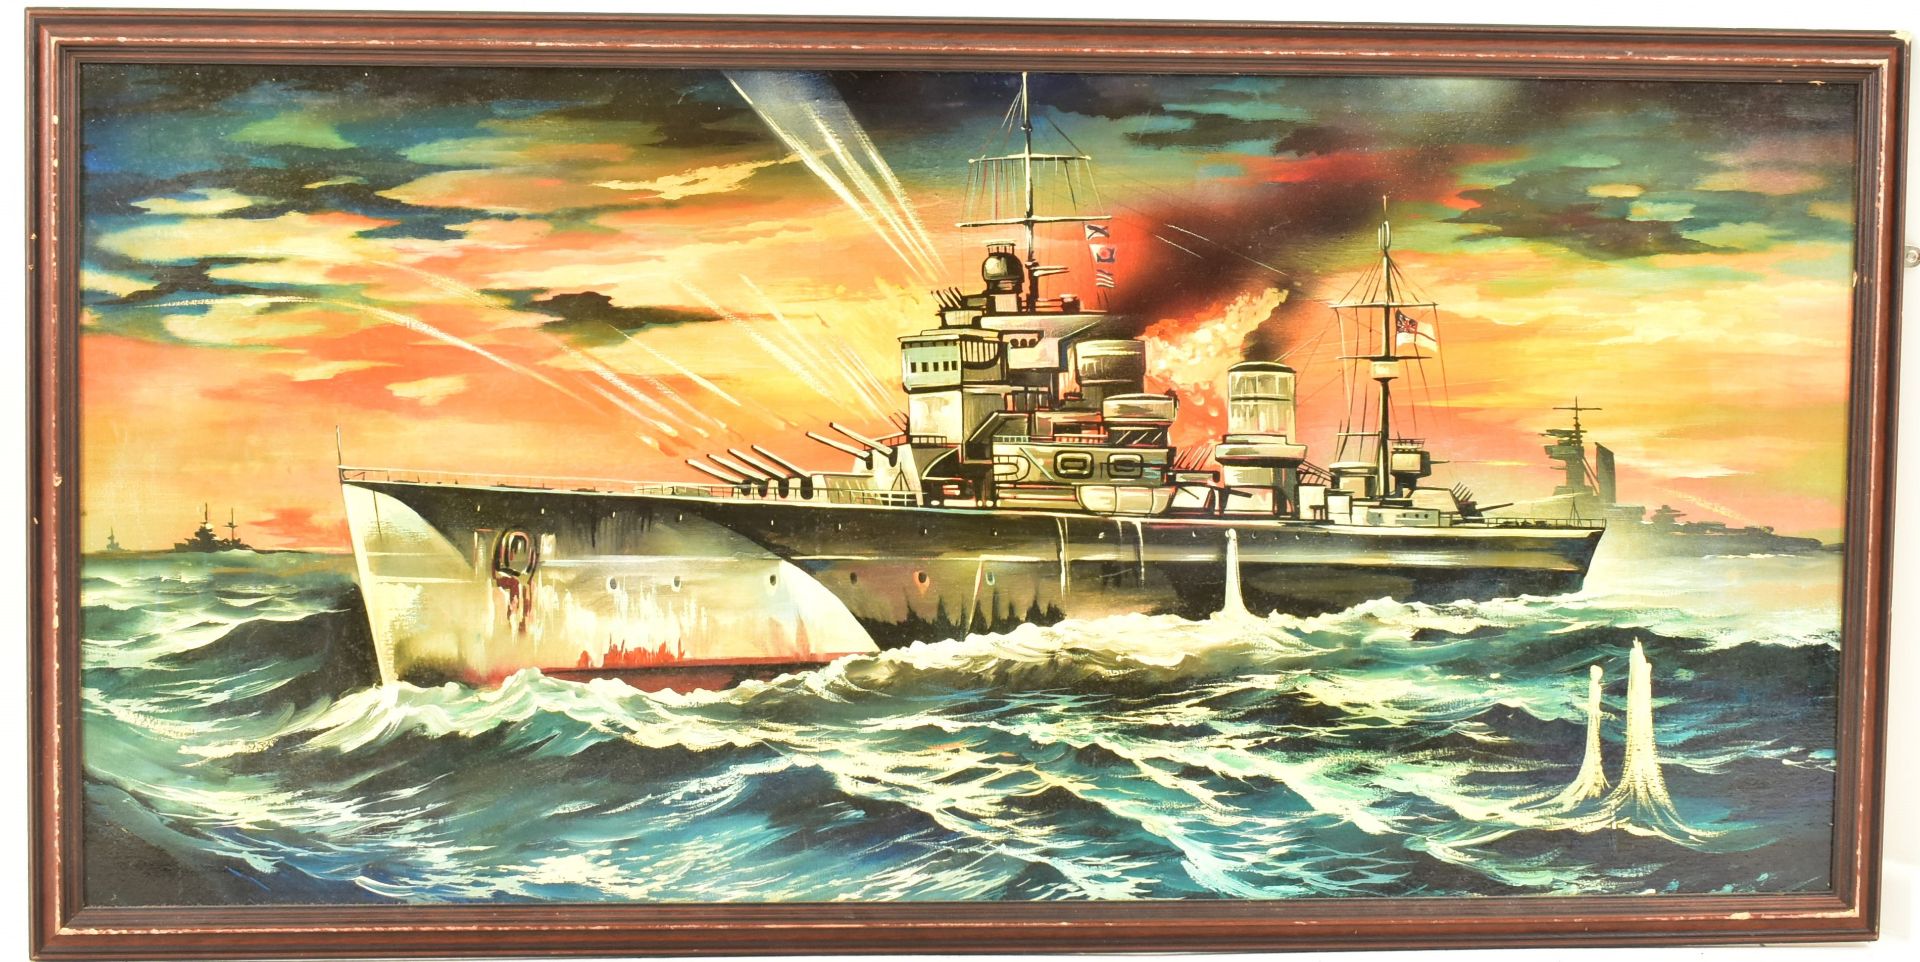 EARLY 2000S RUSSIAN OIL ON BOARD BATTLESHIP PAINTING - Image 2 of 5